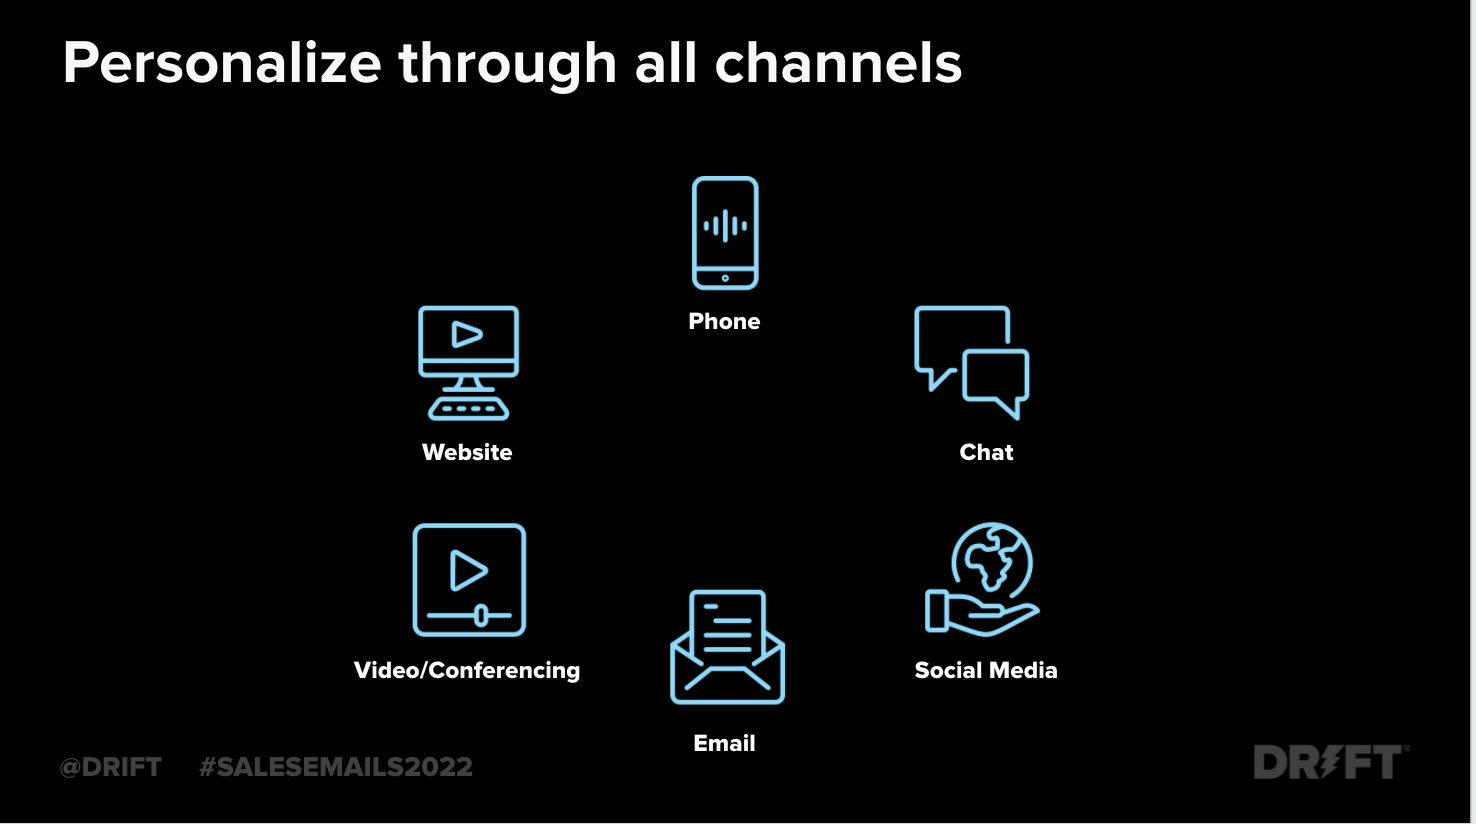 Personalize through all channels